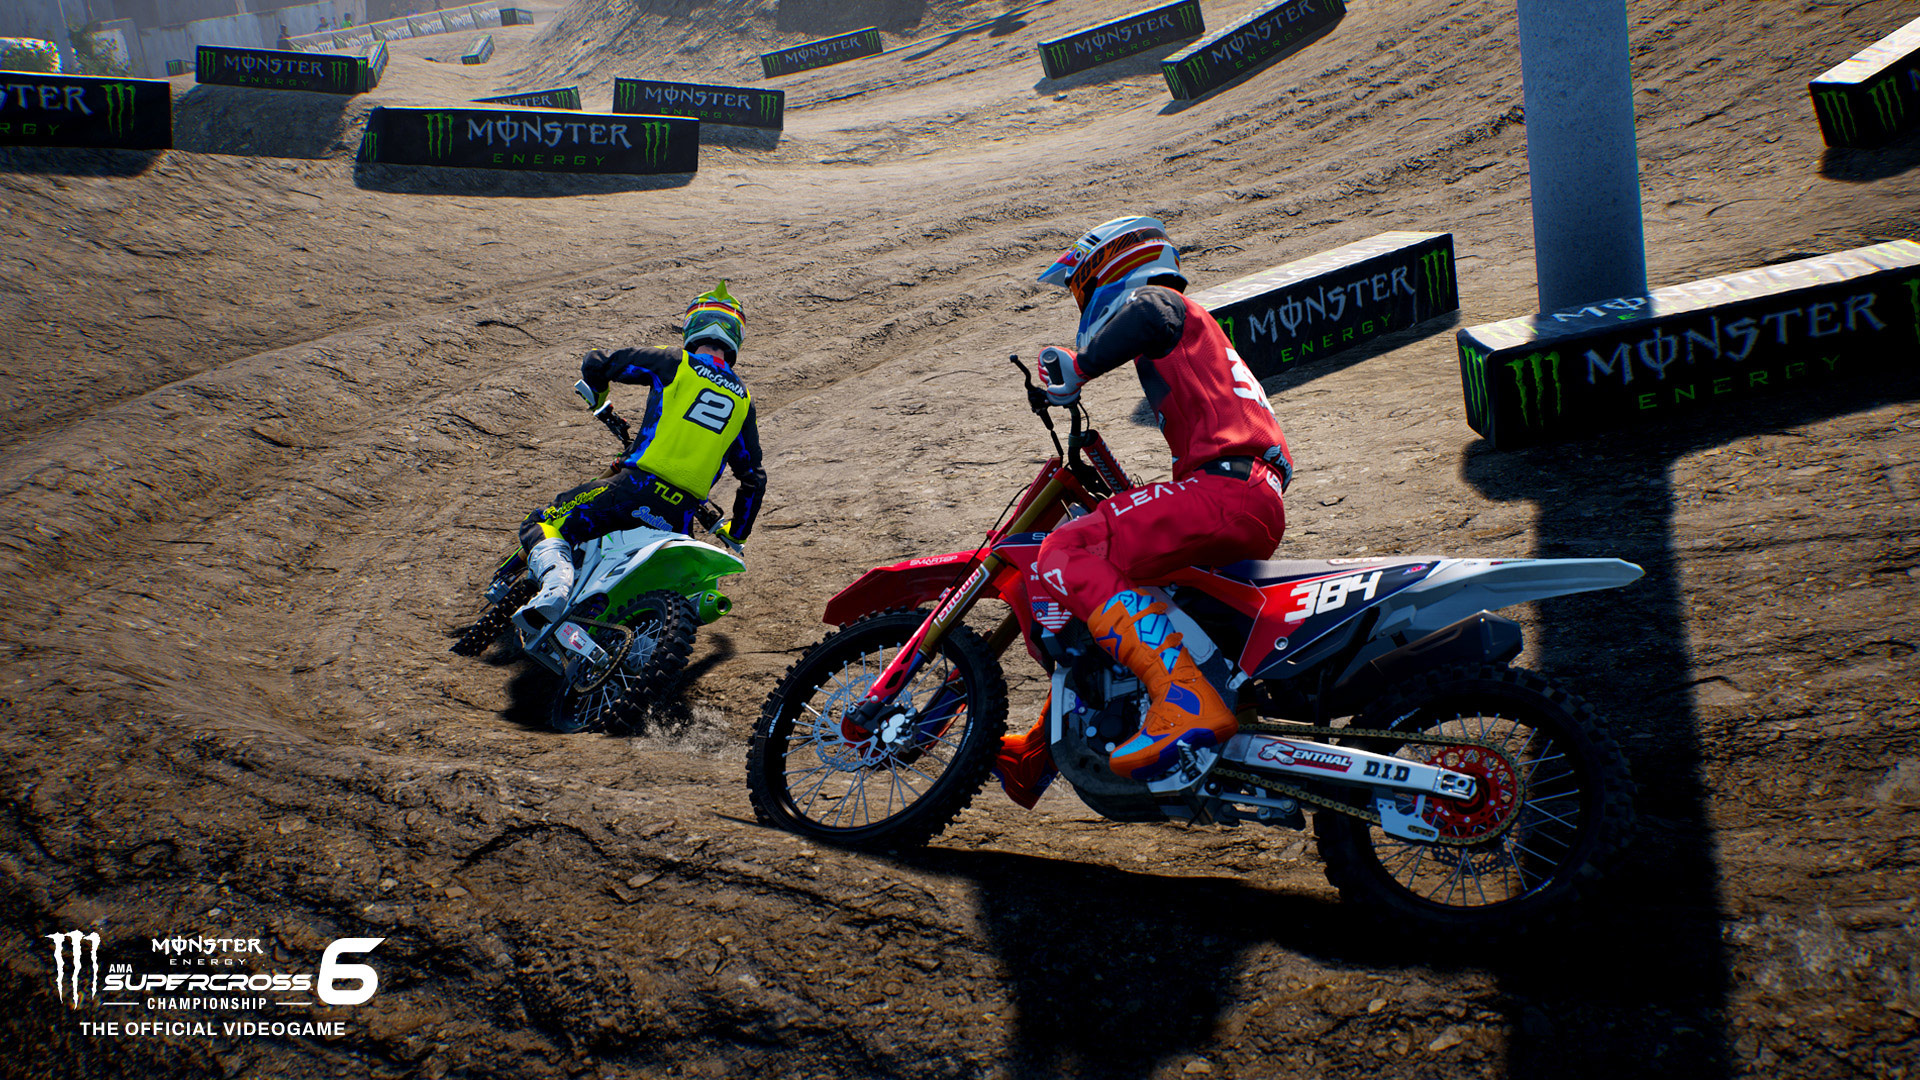 Explore the World of Competitive Dirt Bike Racing in Monster Energy Supercross - The Official Videogame 6